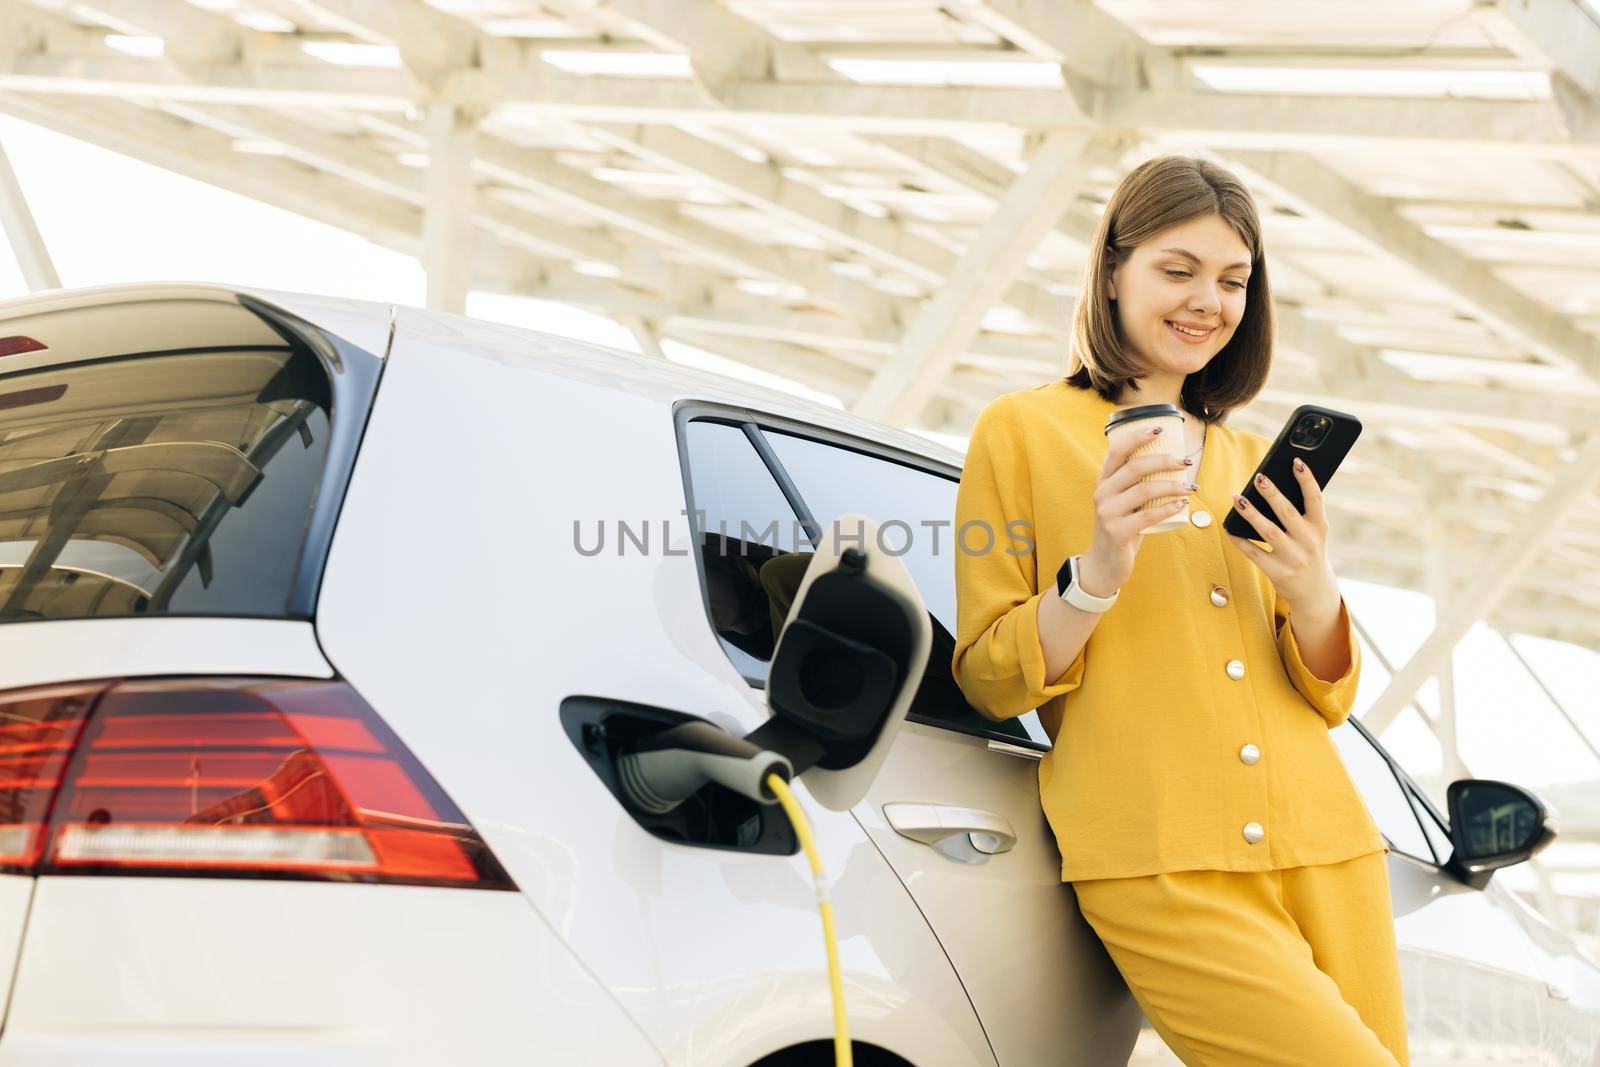 Vehicle charging at public charging station near solar power plant. Woman with a mobile phone and coffee cup standing near charging electric car. Eco friendly alternative energy transport by uflypro